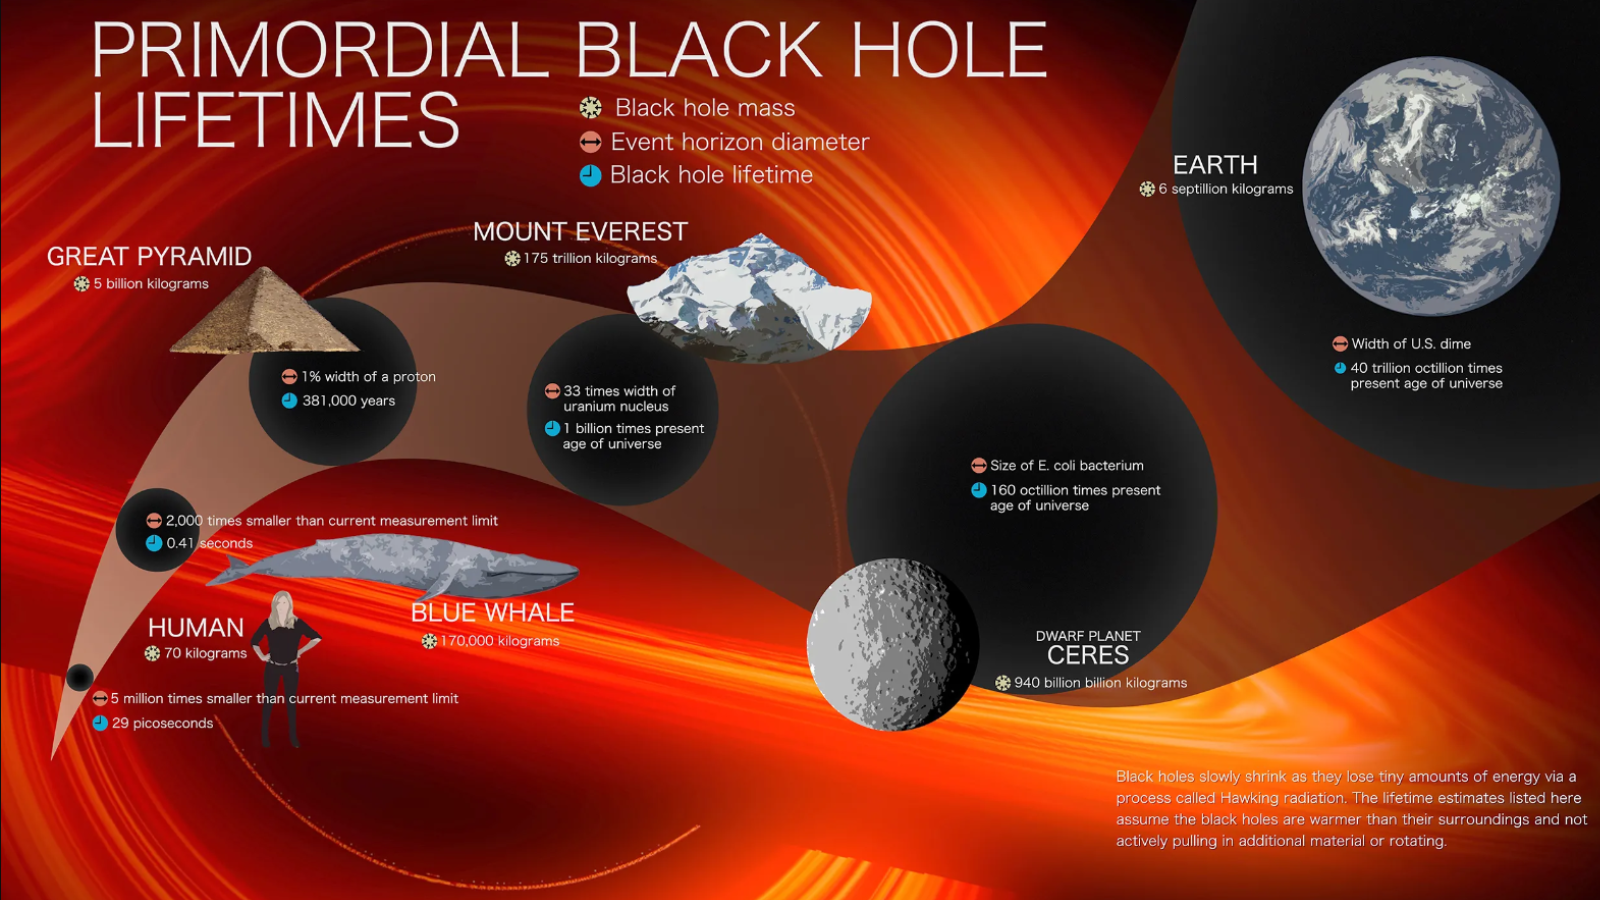 An infographic of black hole lifetimes, using objects such as Earth, Mount Everest and humans for comparison.